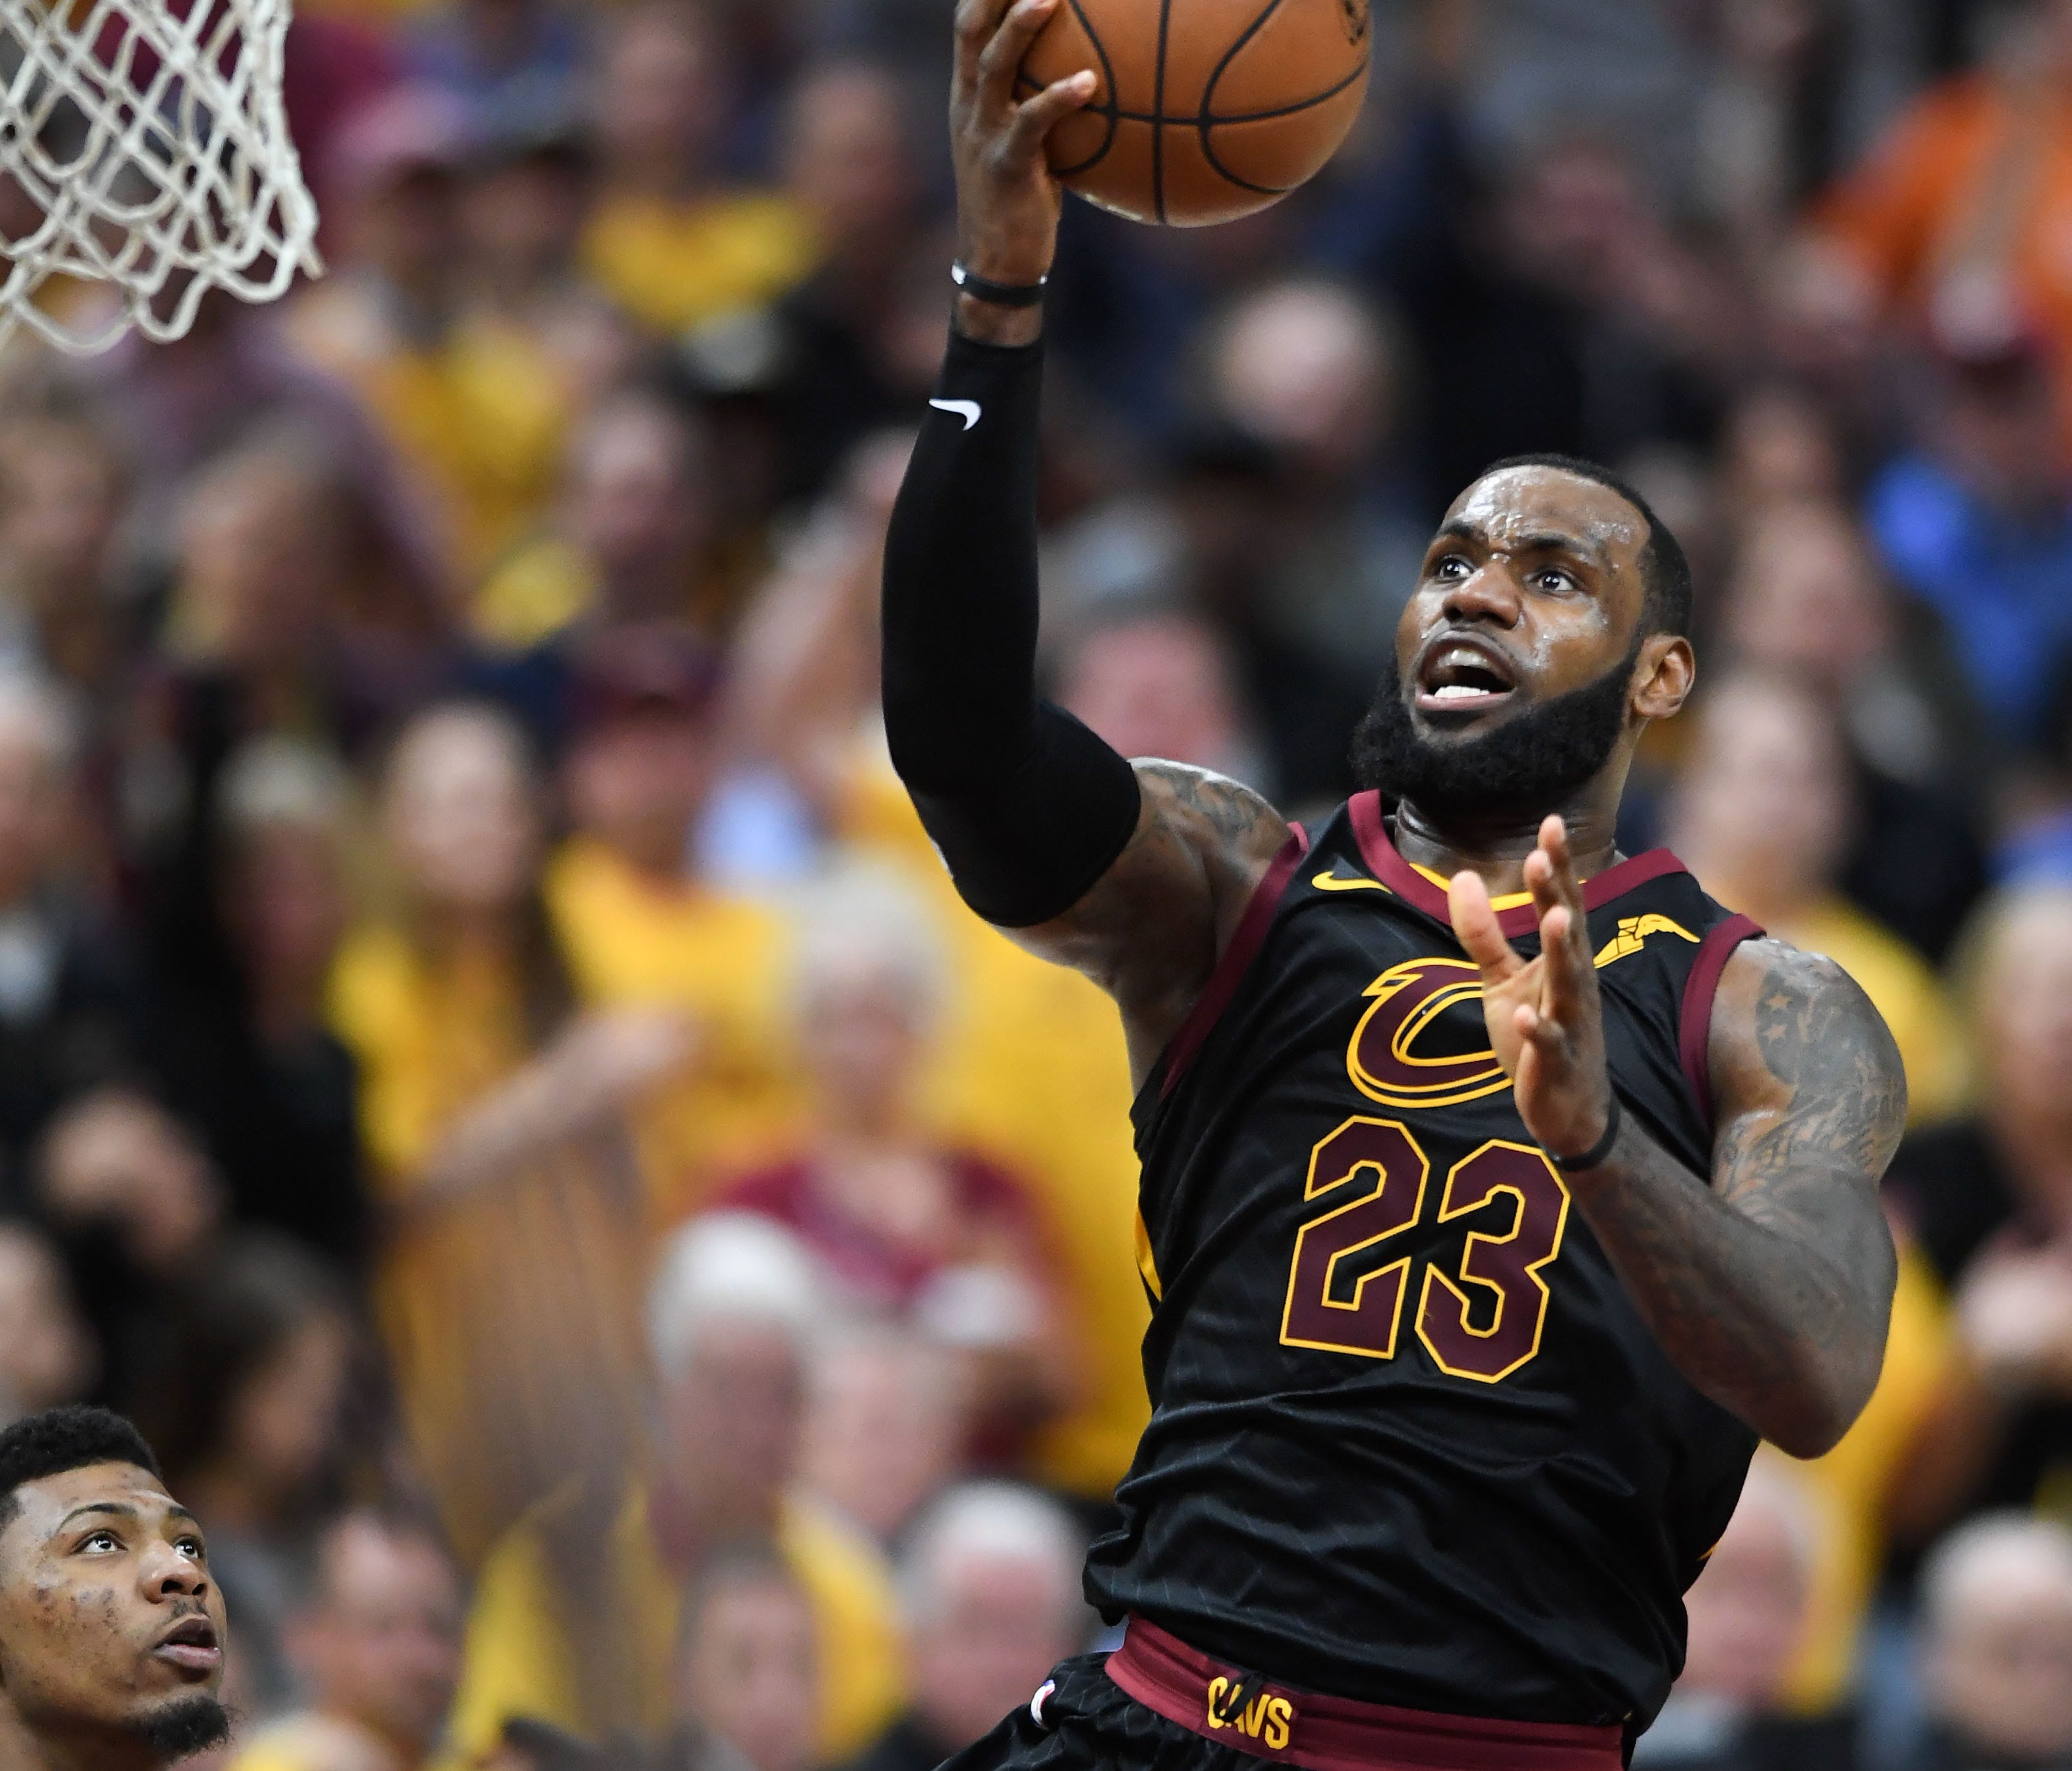 Cleveland Cavaliers forward LeBron James (23) attempts a layup against the Boston Celtics during the third quarter in game four of the Eastern conference finals of the 2018 NBA Playoffs at Quicken Loans Arena.